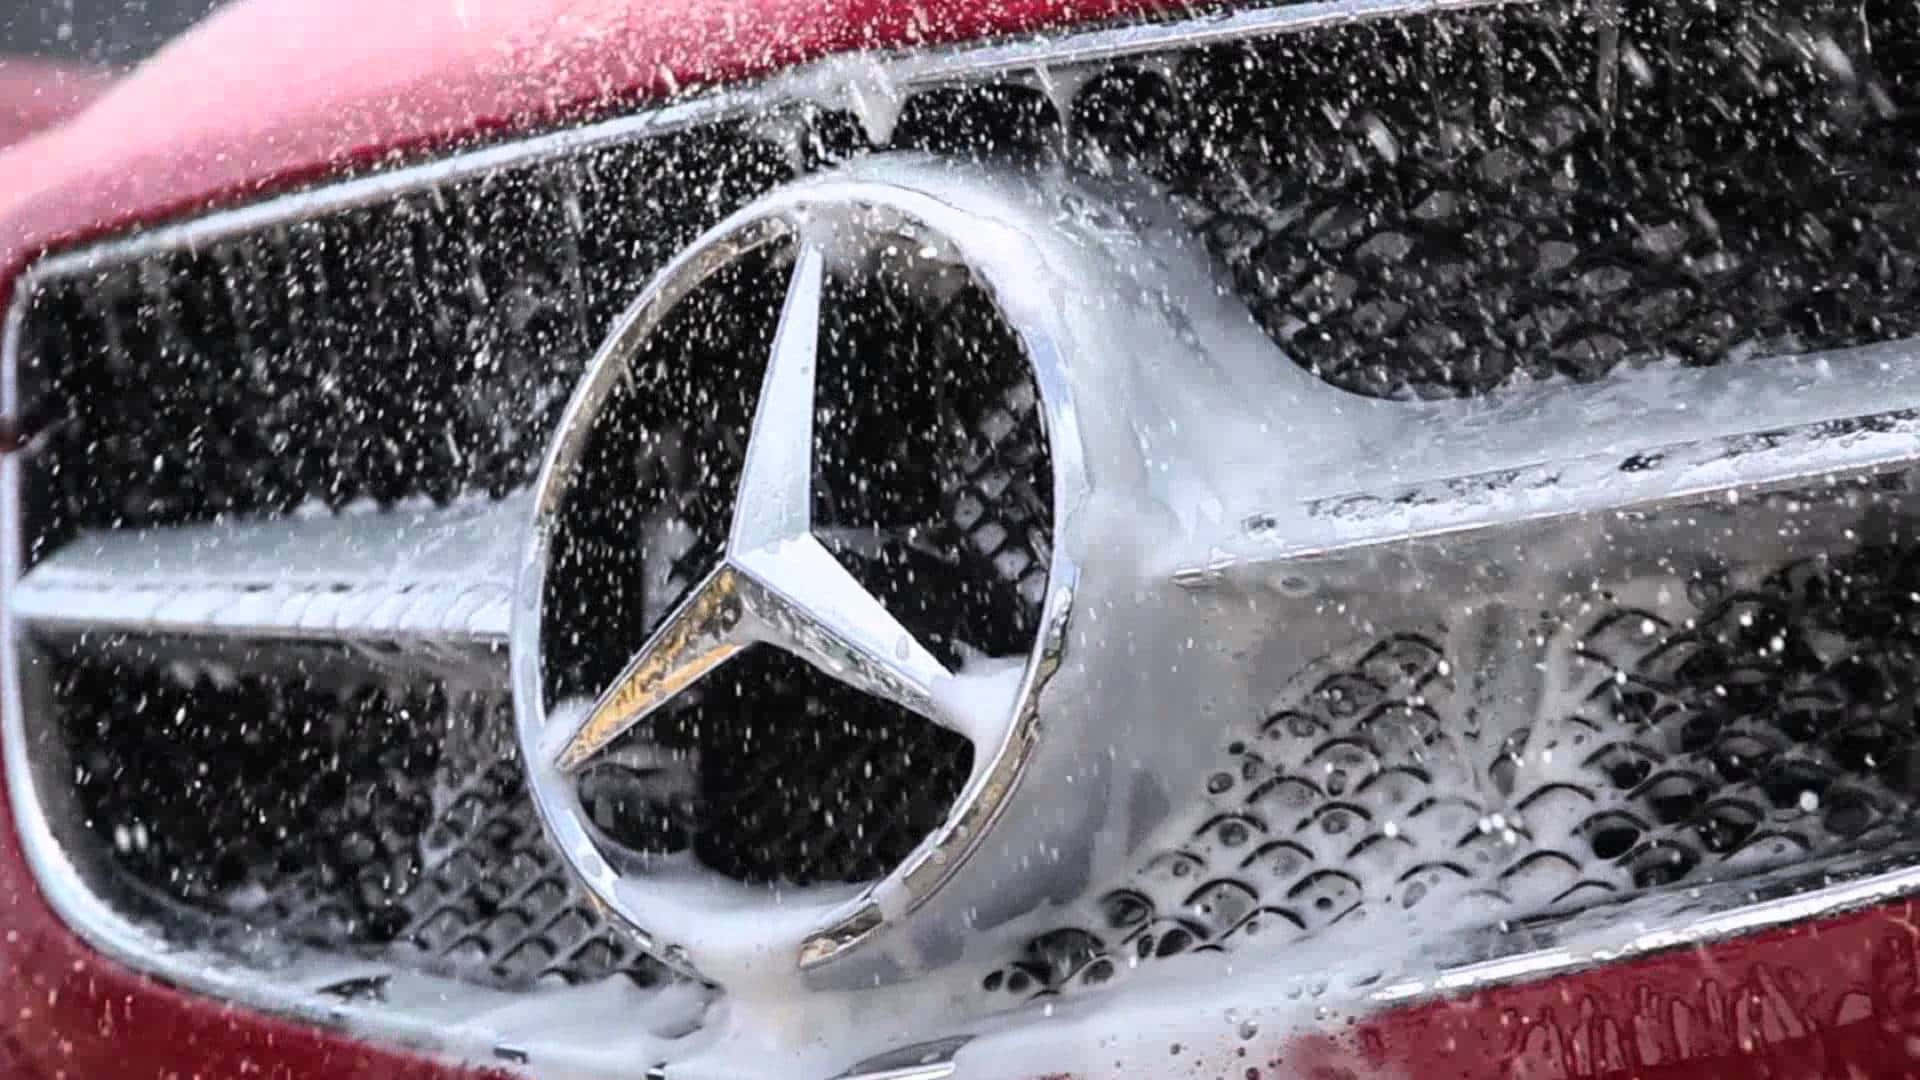 Exceptional Red Mercedes Undergoing Professional Car Detailing Wallpaper